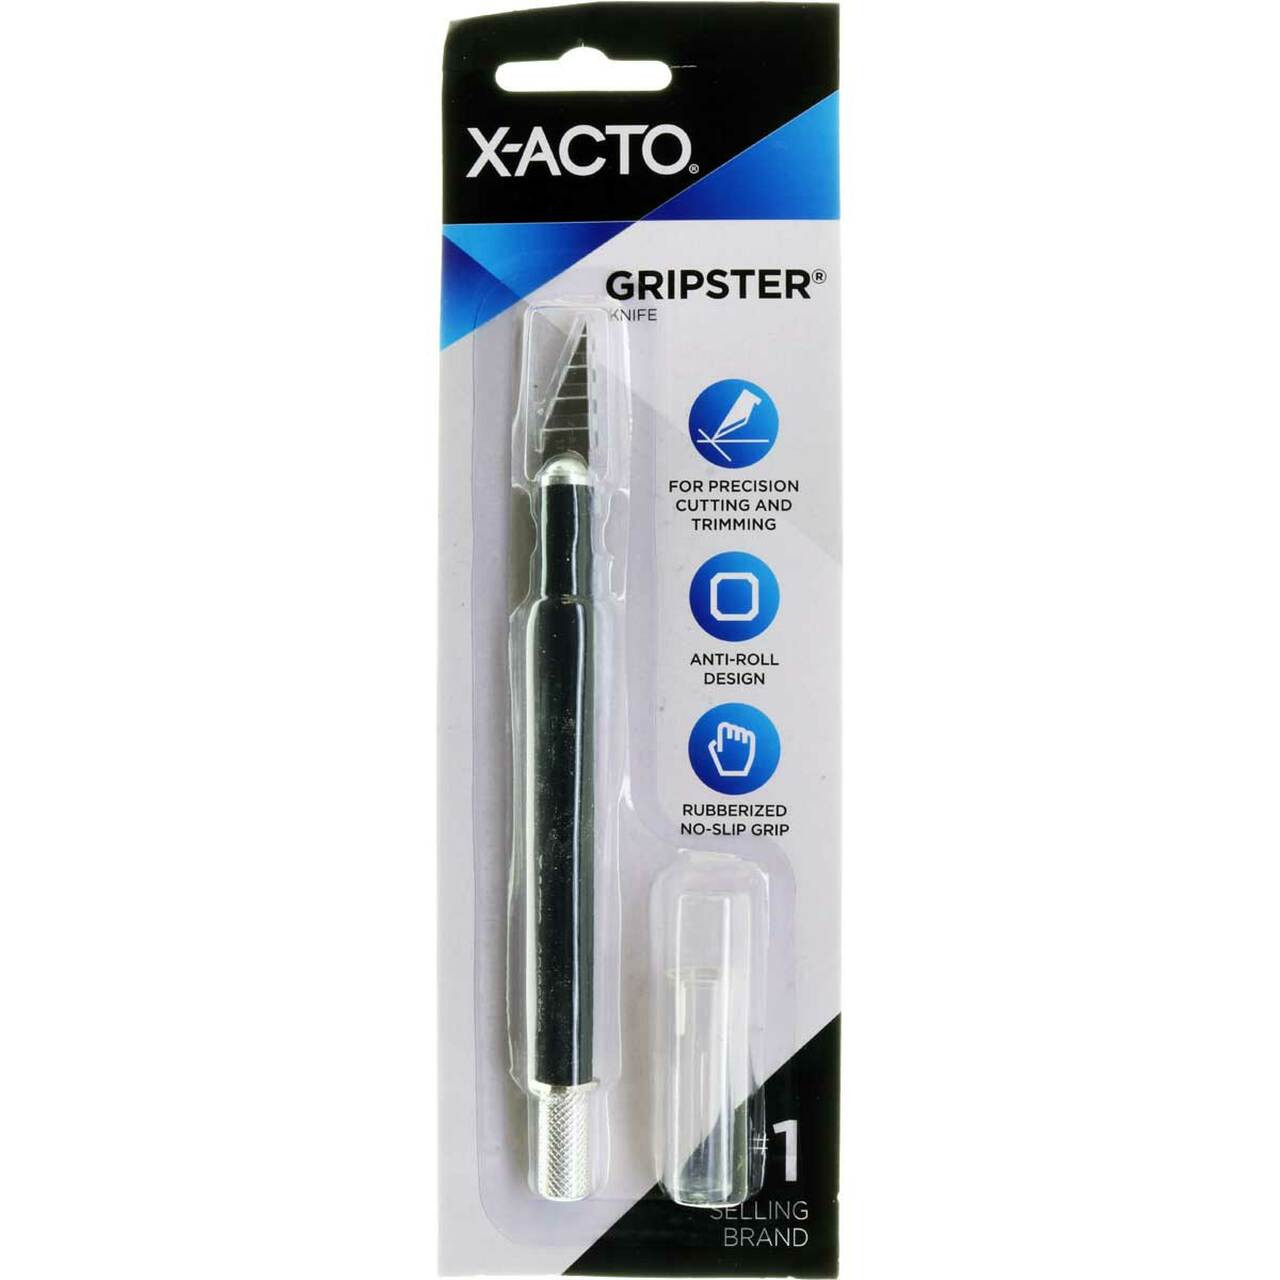 Buy X-ACTO™ #3626 Gripster Knife + Safety Cap Online